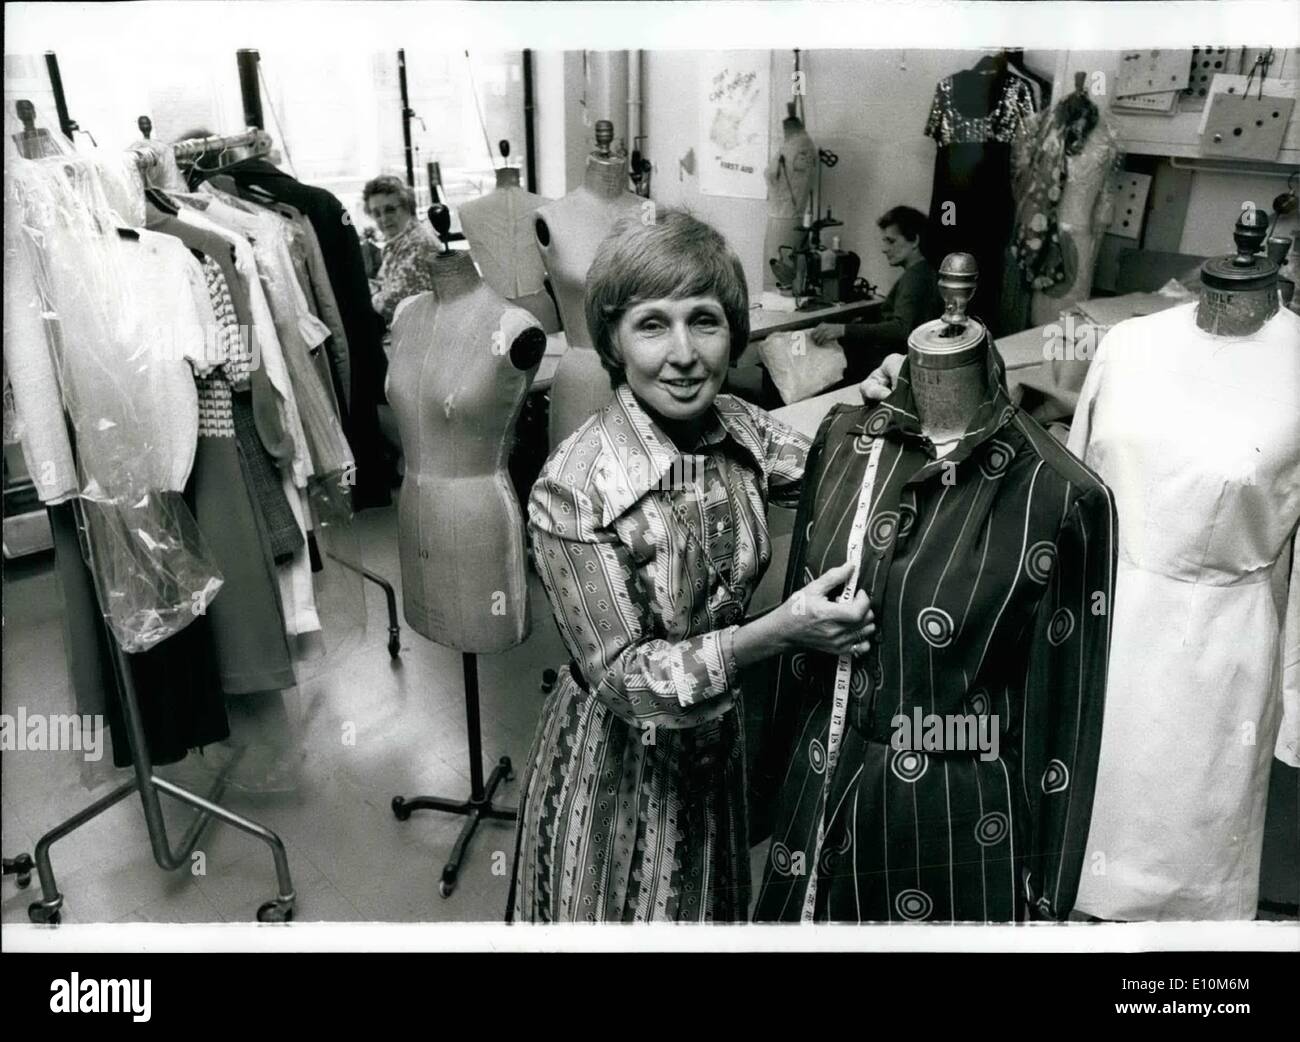 Jun. 06, 1973 - Susan Small To Make Princess Anne's Wedding Dress: Princess Anne has asked Mrs. Maureen Baker, of the Susan Small fashion house, to design her wedding dress. Mrs. Baker, who design most of the Princess Anne's wardrobe, will also be responsible for her going away outfit/. Photo Shows Mrs. Maureen Baker pictured today in the Workshop of the Susan Small fashion house in London. Stock Photo